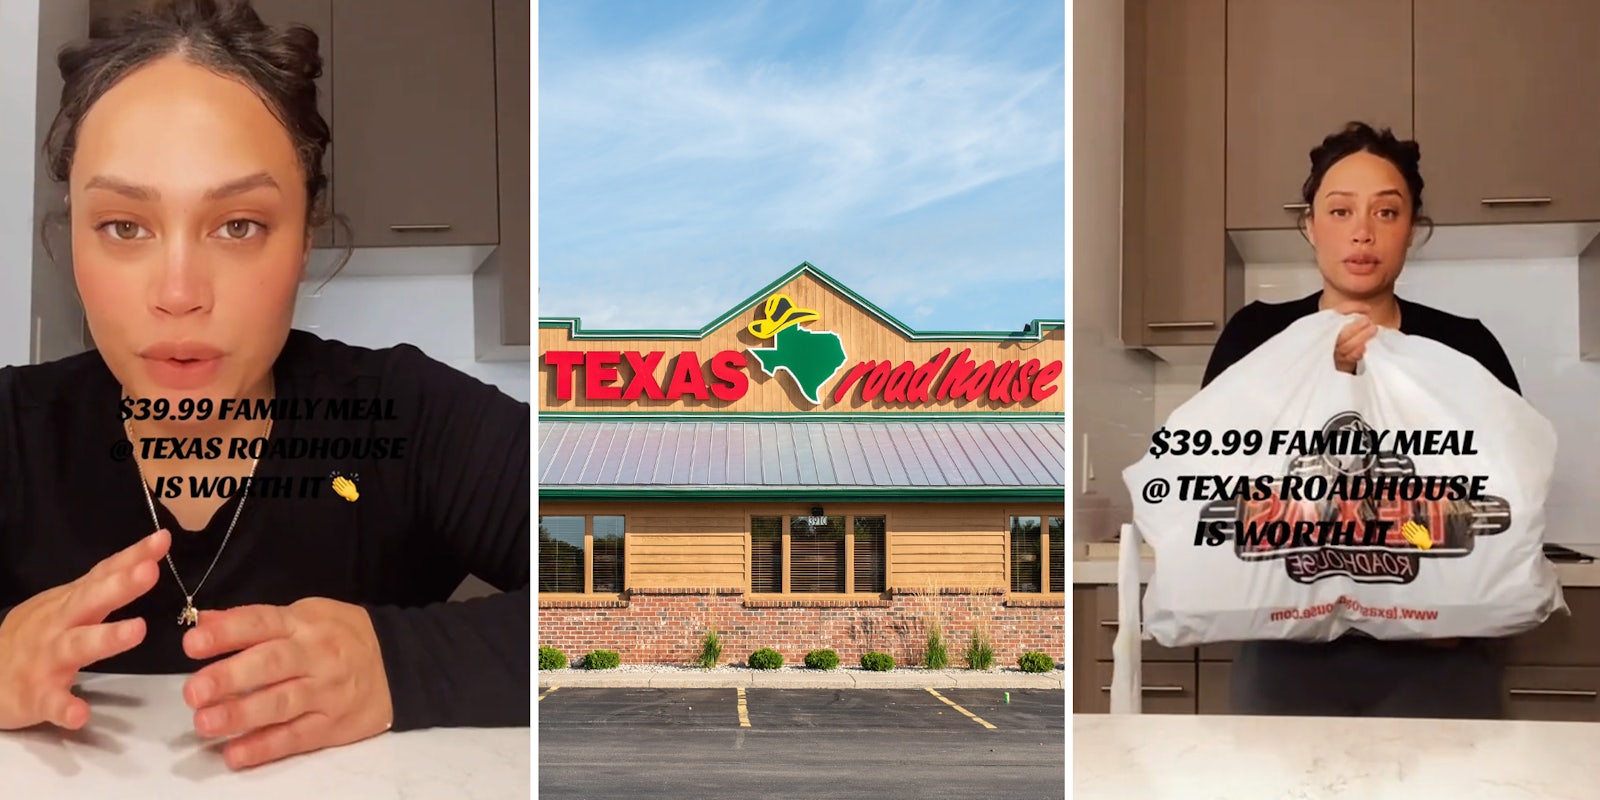 Woman orders $39.99 family meal from Texas Roadhouse, gets so much more than she bargained for